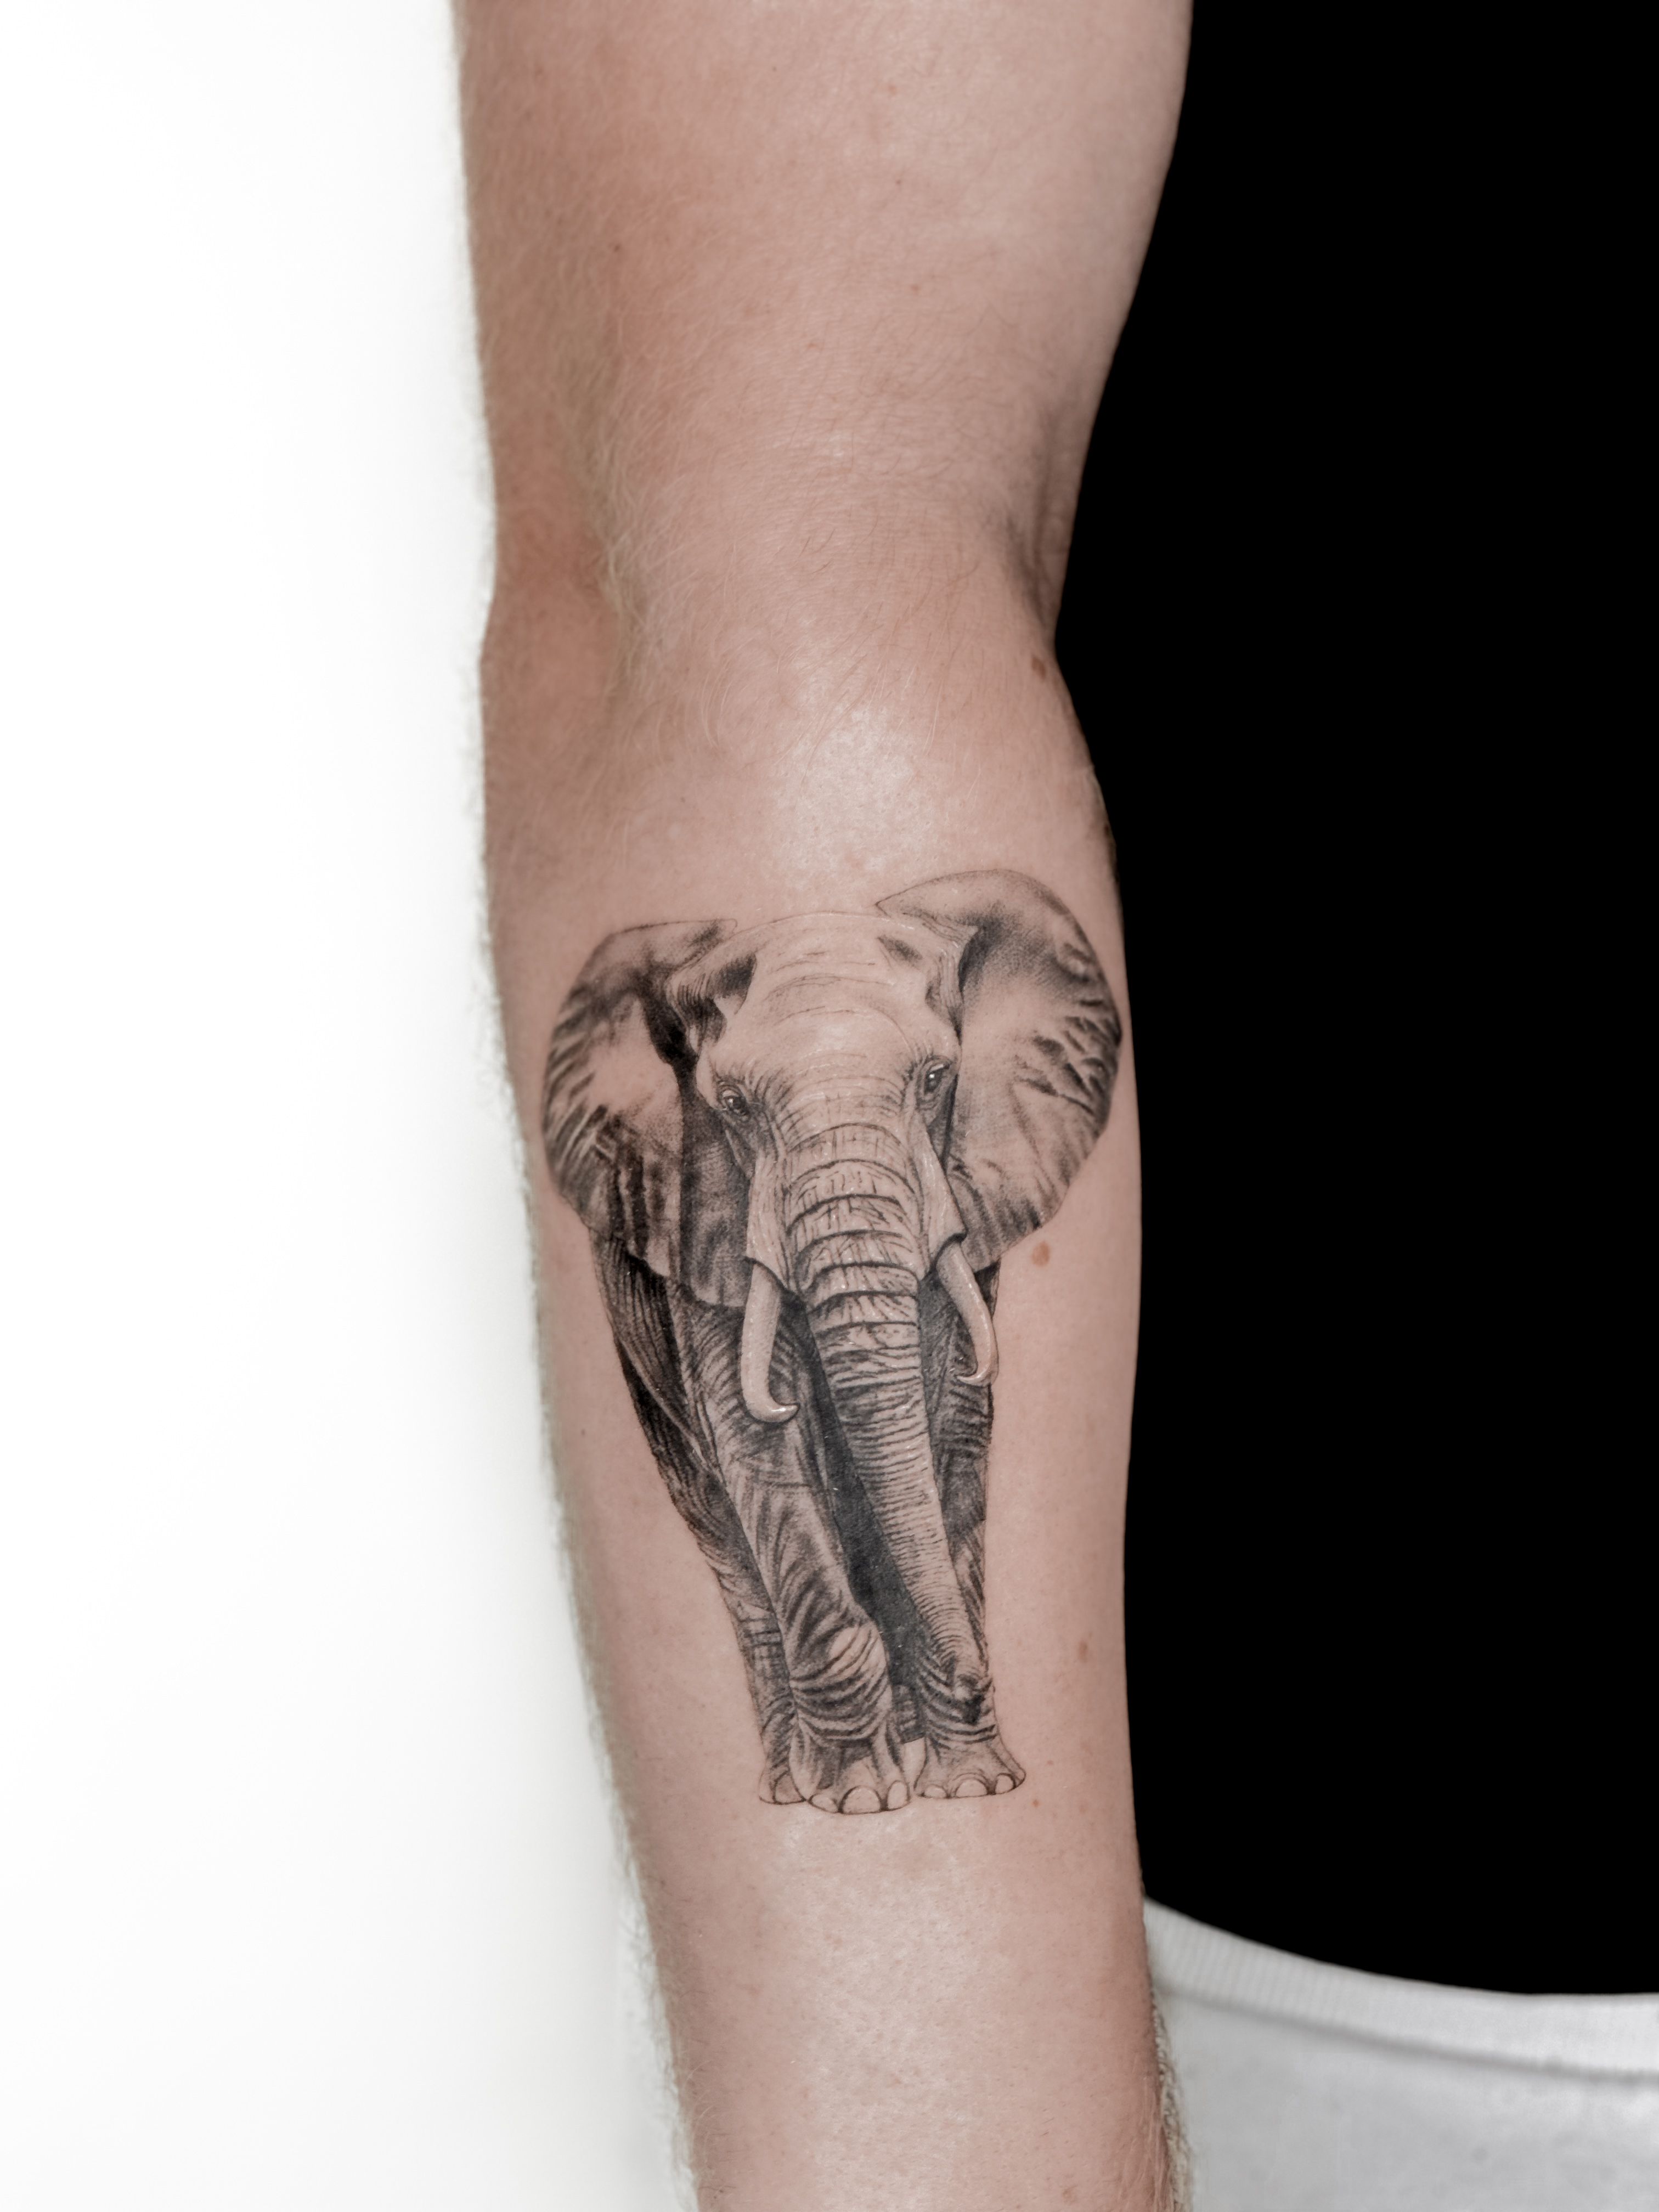 Abstract elephant tattoo located on the inner arm.